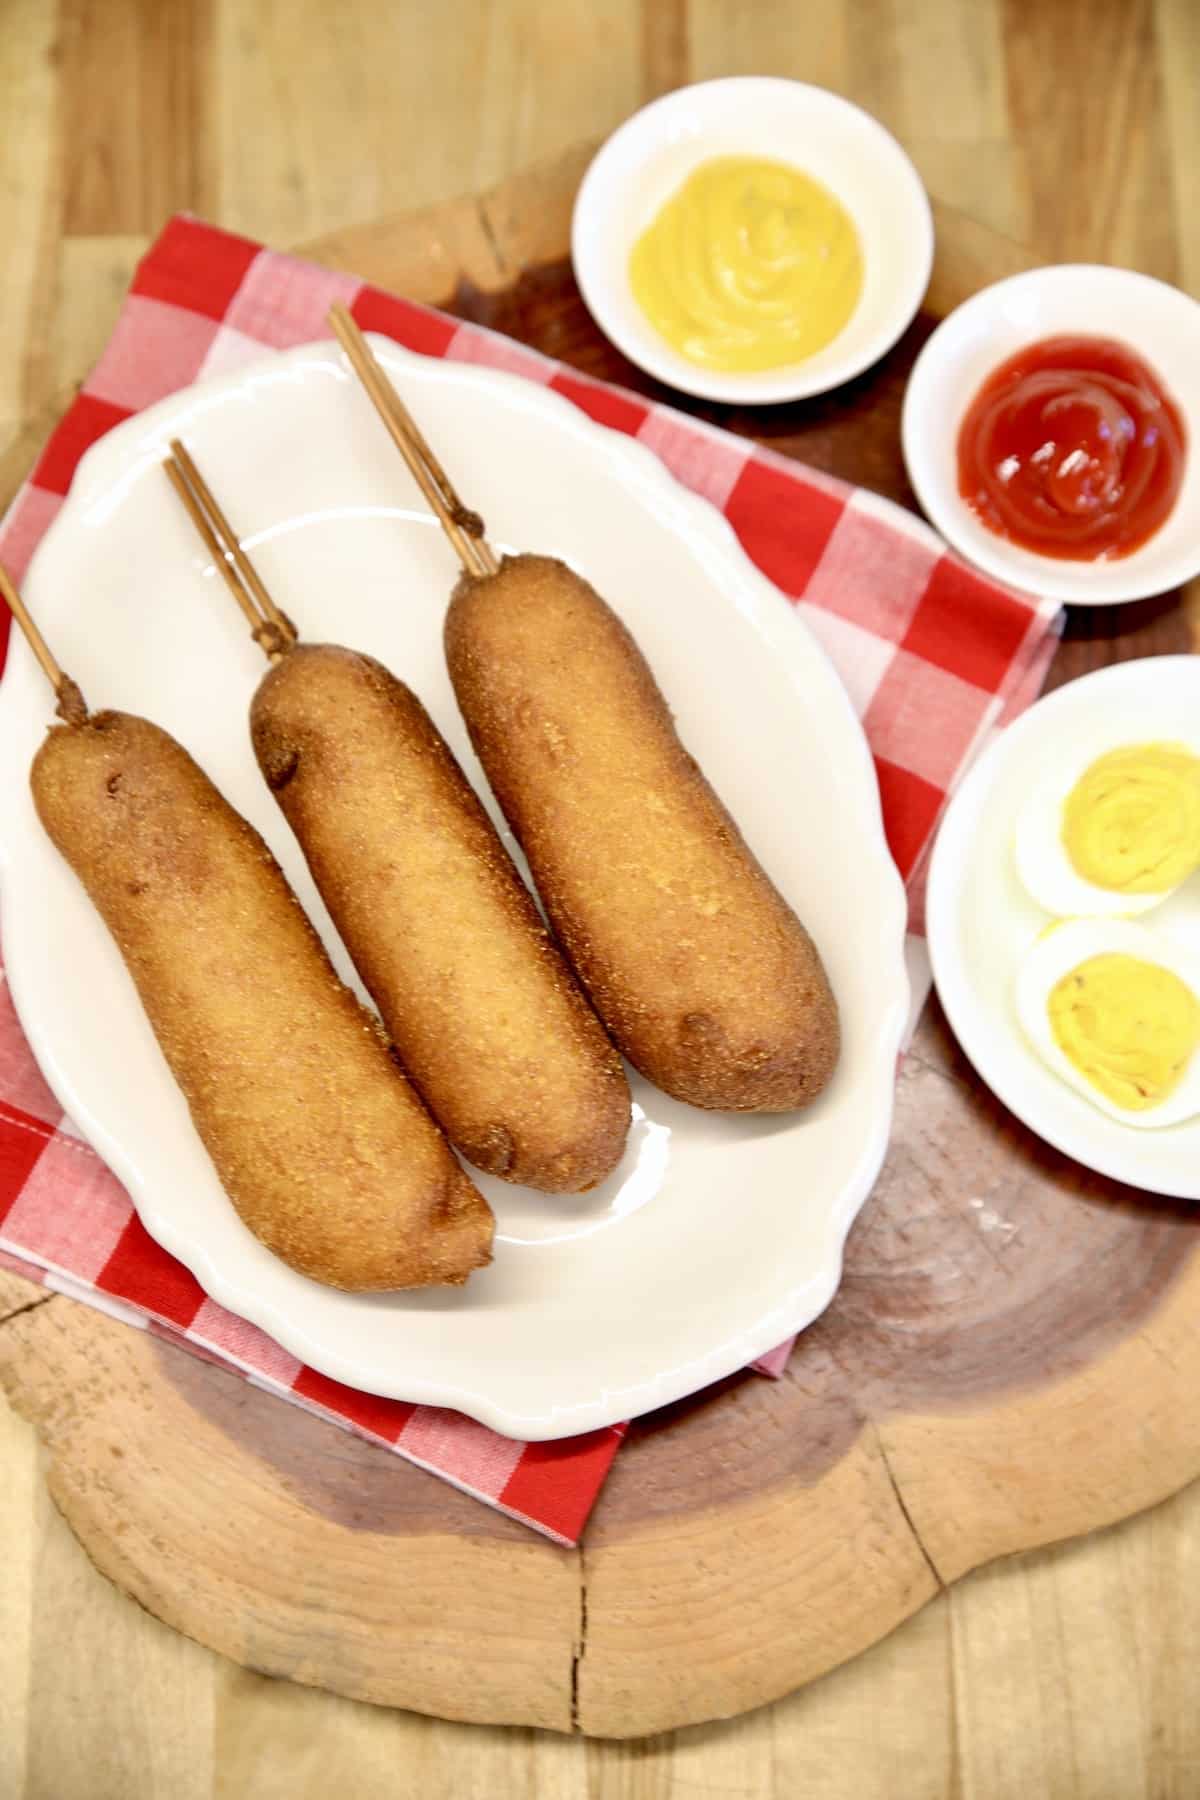 3 corn dogs on a platter, bowl of mustard, ketchup, deviled eggs.